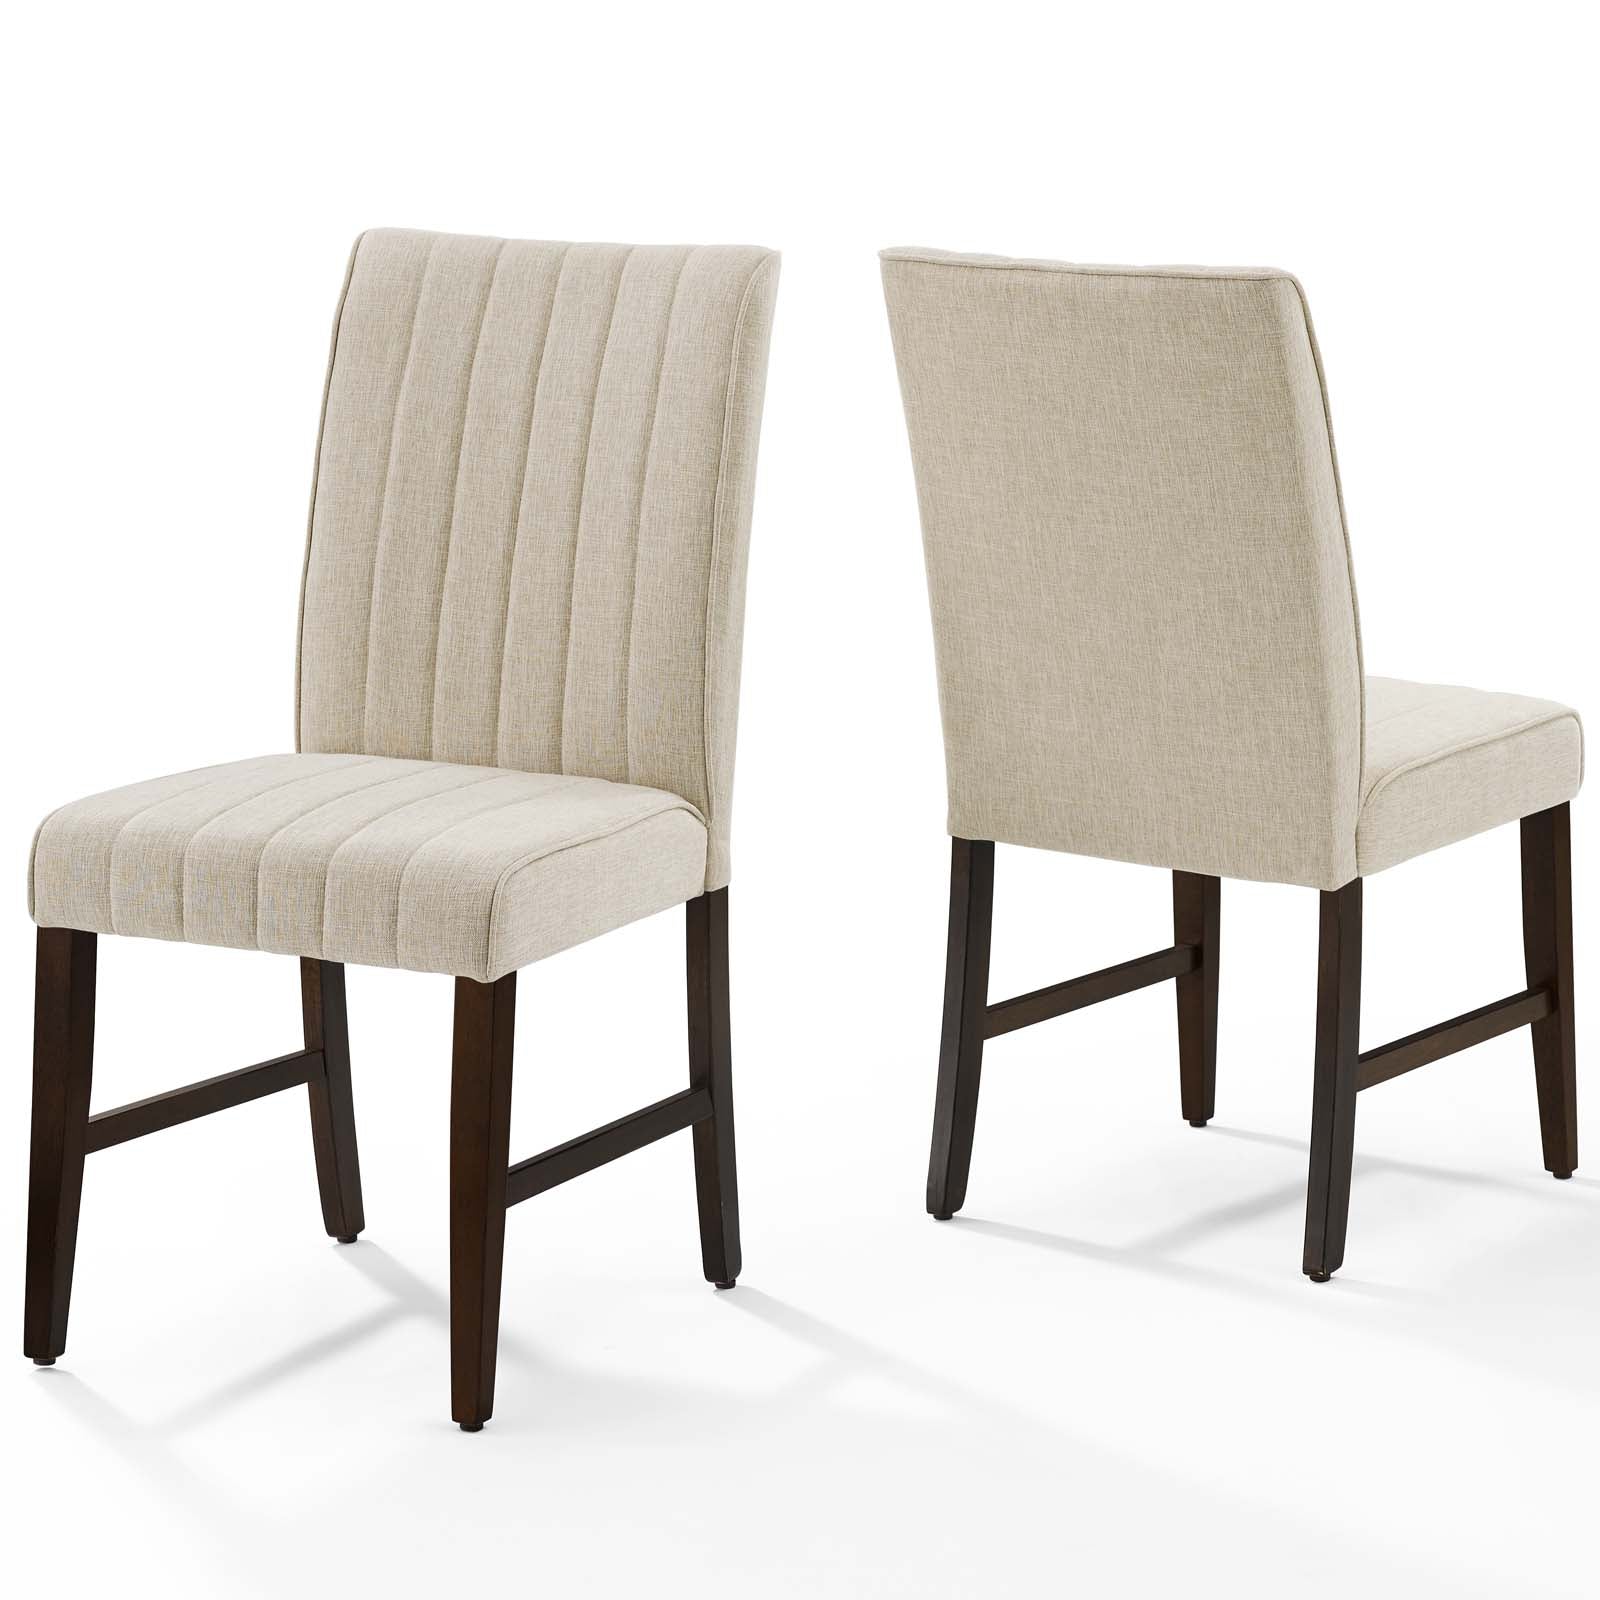 Motivate Channel Tufted Upholstered Dining Chair Set of 2